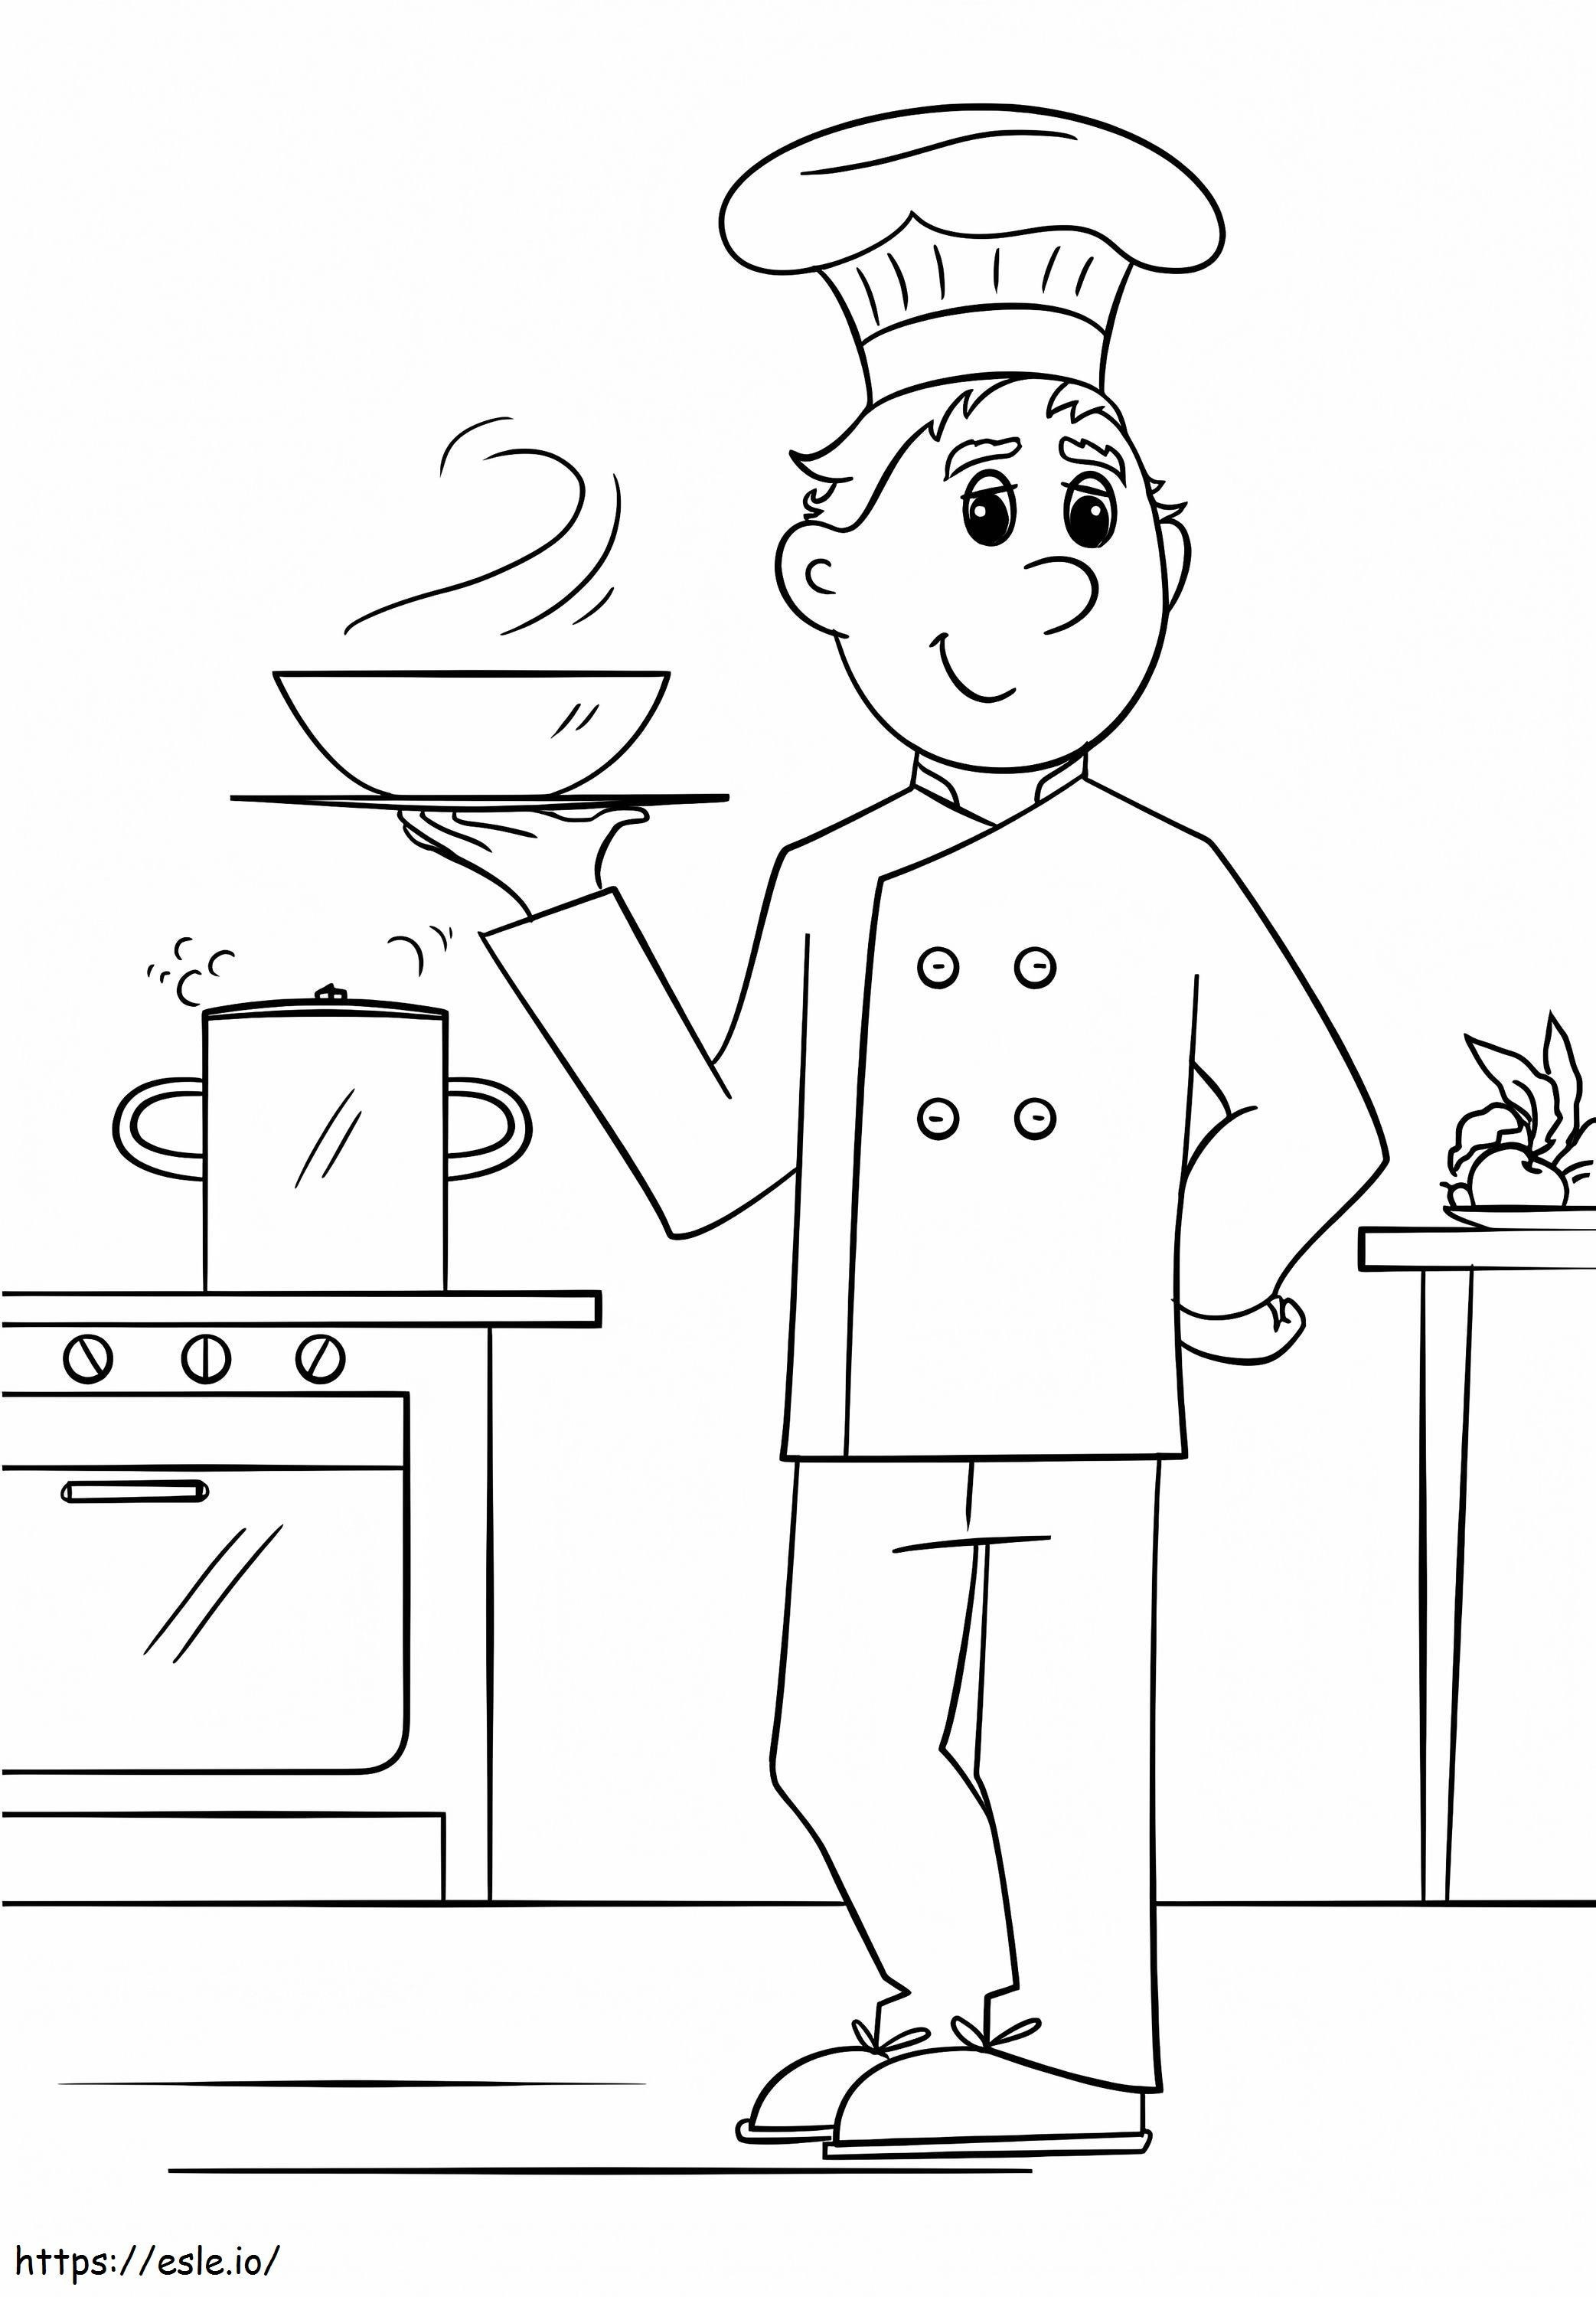 Chef coloring page